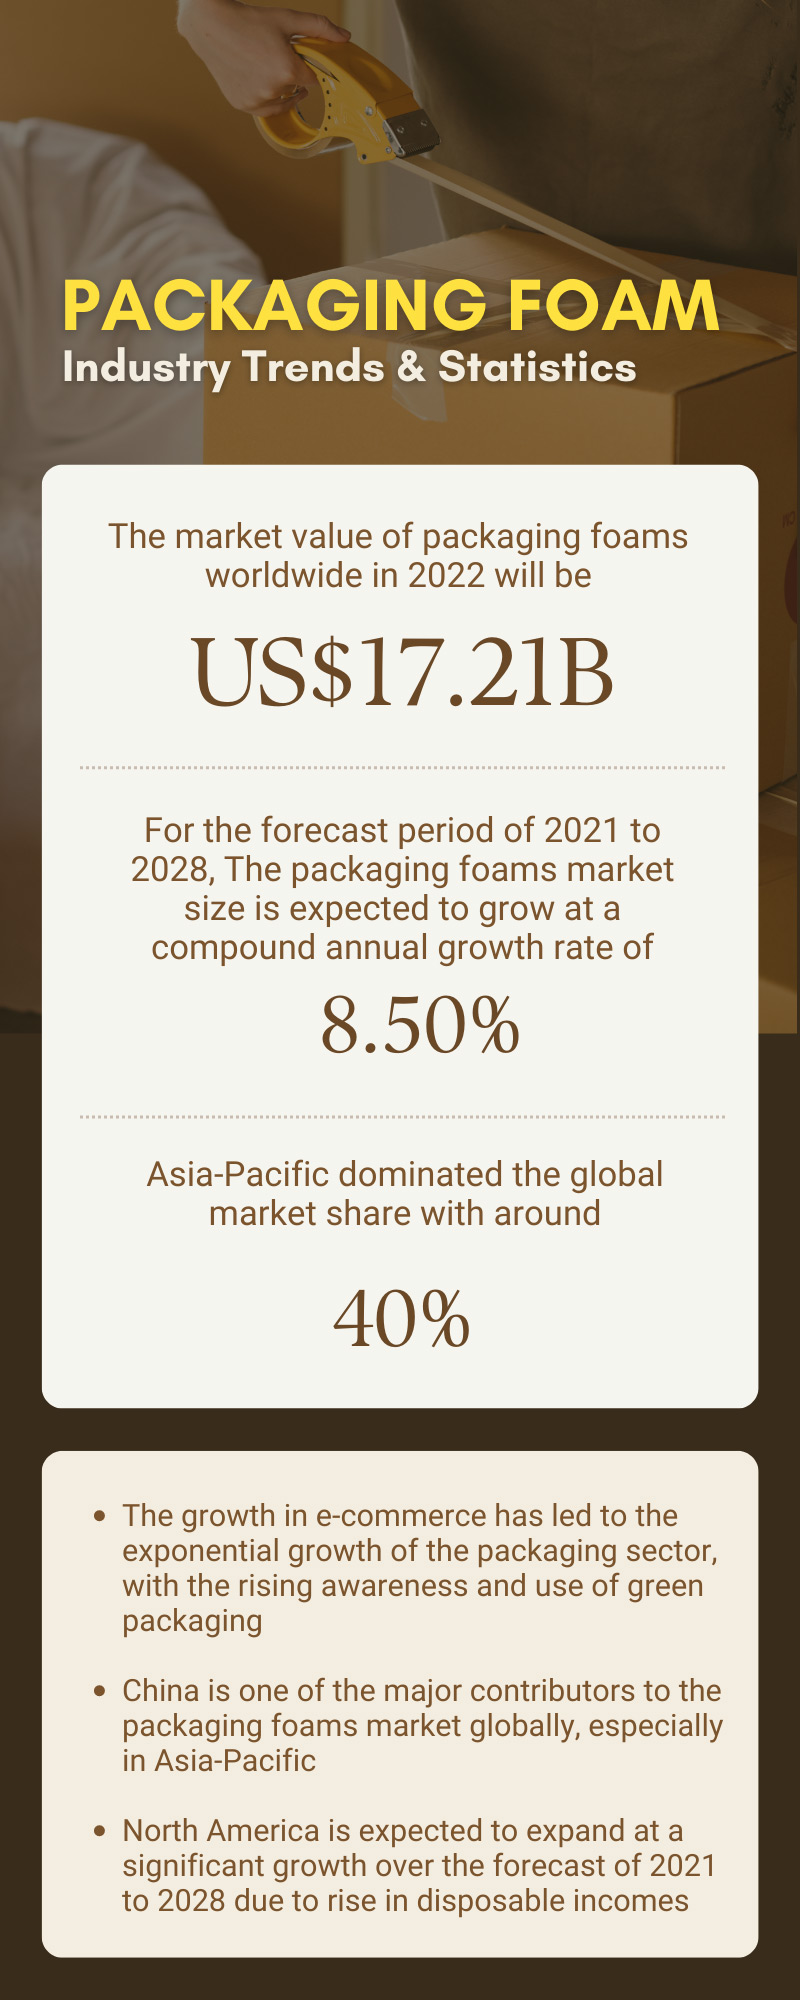 anyfoam infographic packaging foam industry trends